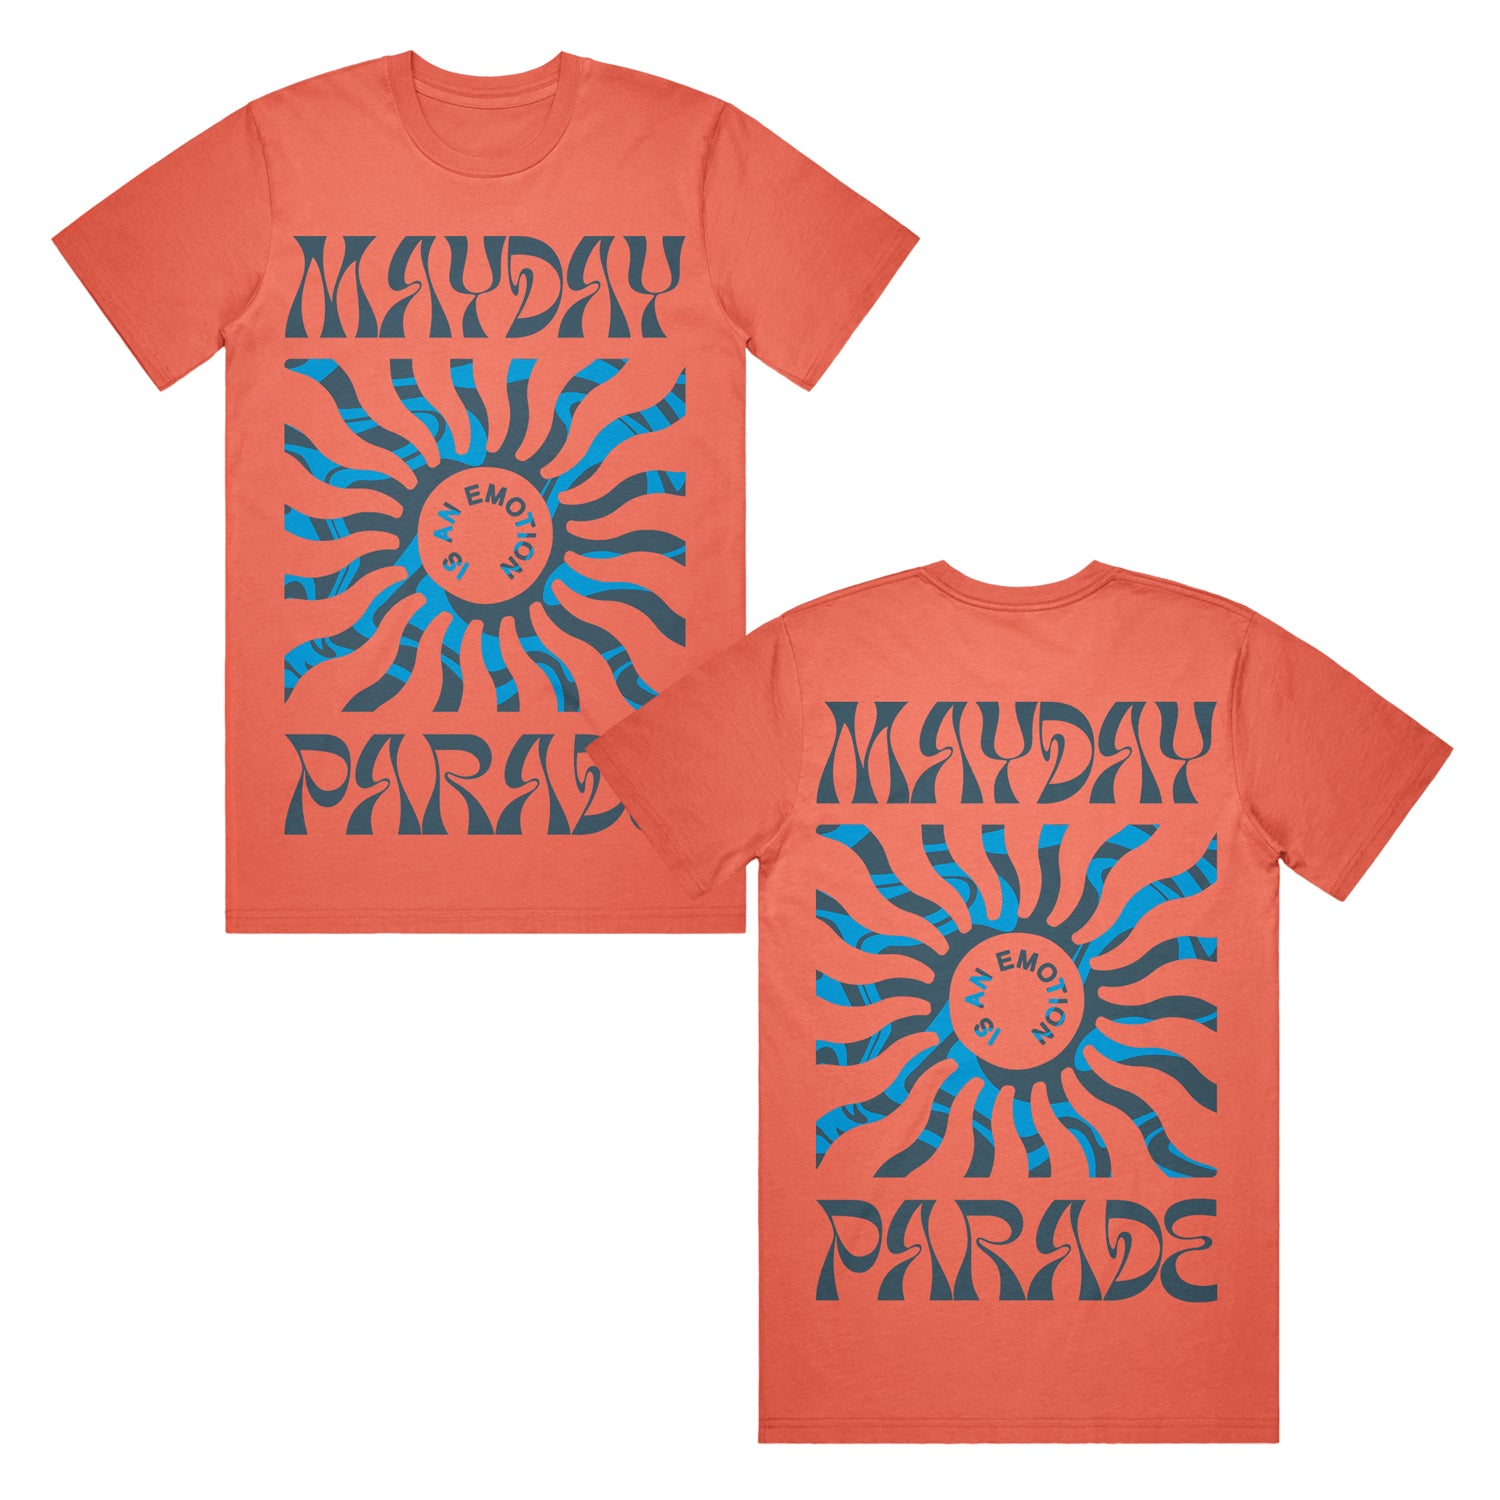 image of the front and back of a salmon colored tee shirt on a white background. front of tee is on the left and has a full body print. at the top says mayday and the bottom says parade. in the center is a blue sun shape and inside says is an emotion. the back of the tee is on the right and has the same print as the front of the tee.